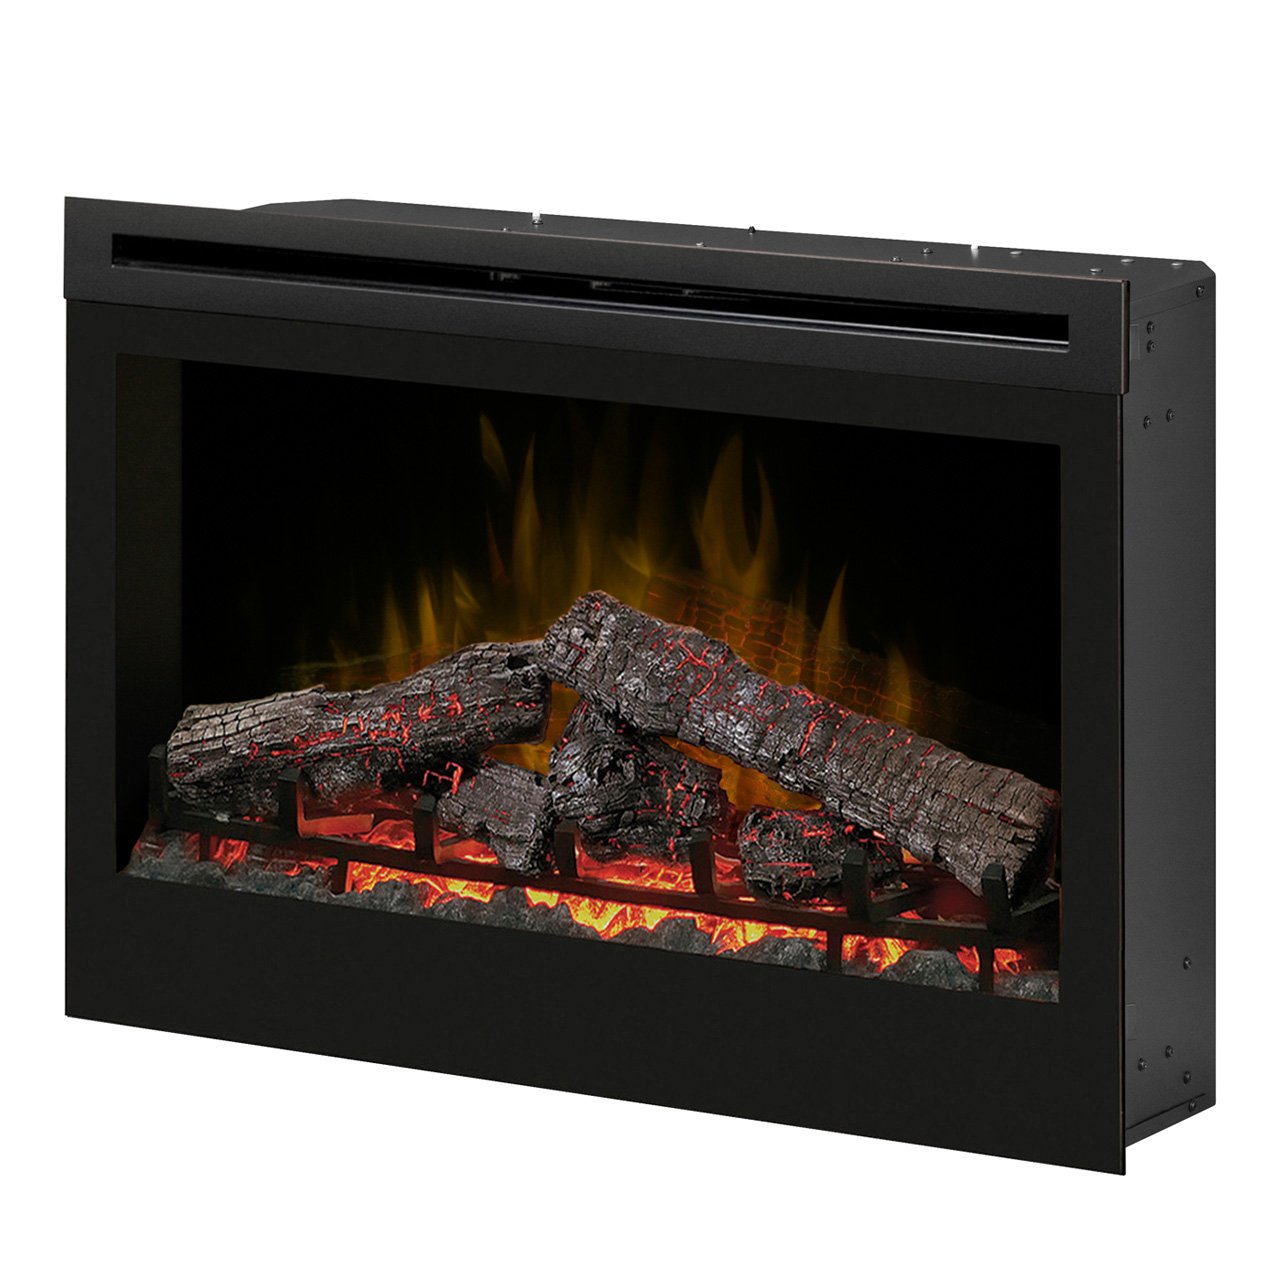 Western Fireplace Screen Awesome Dimplex Df3033st 33 Inch Self Trimming Electric Fireplace Insert